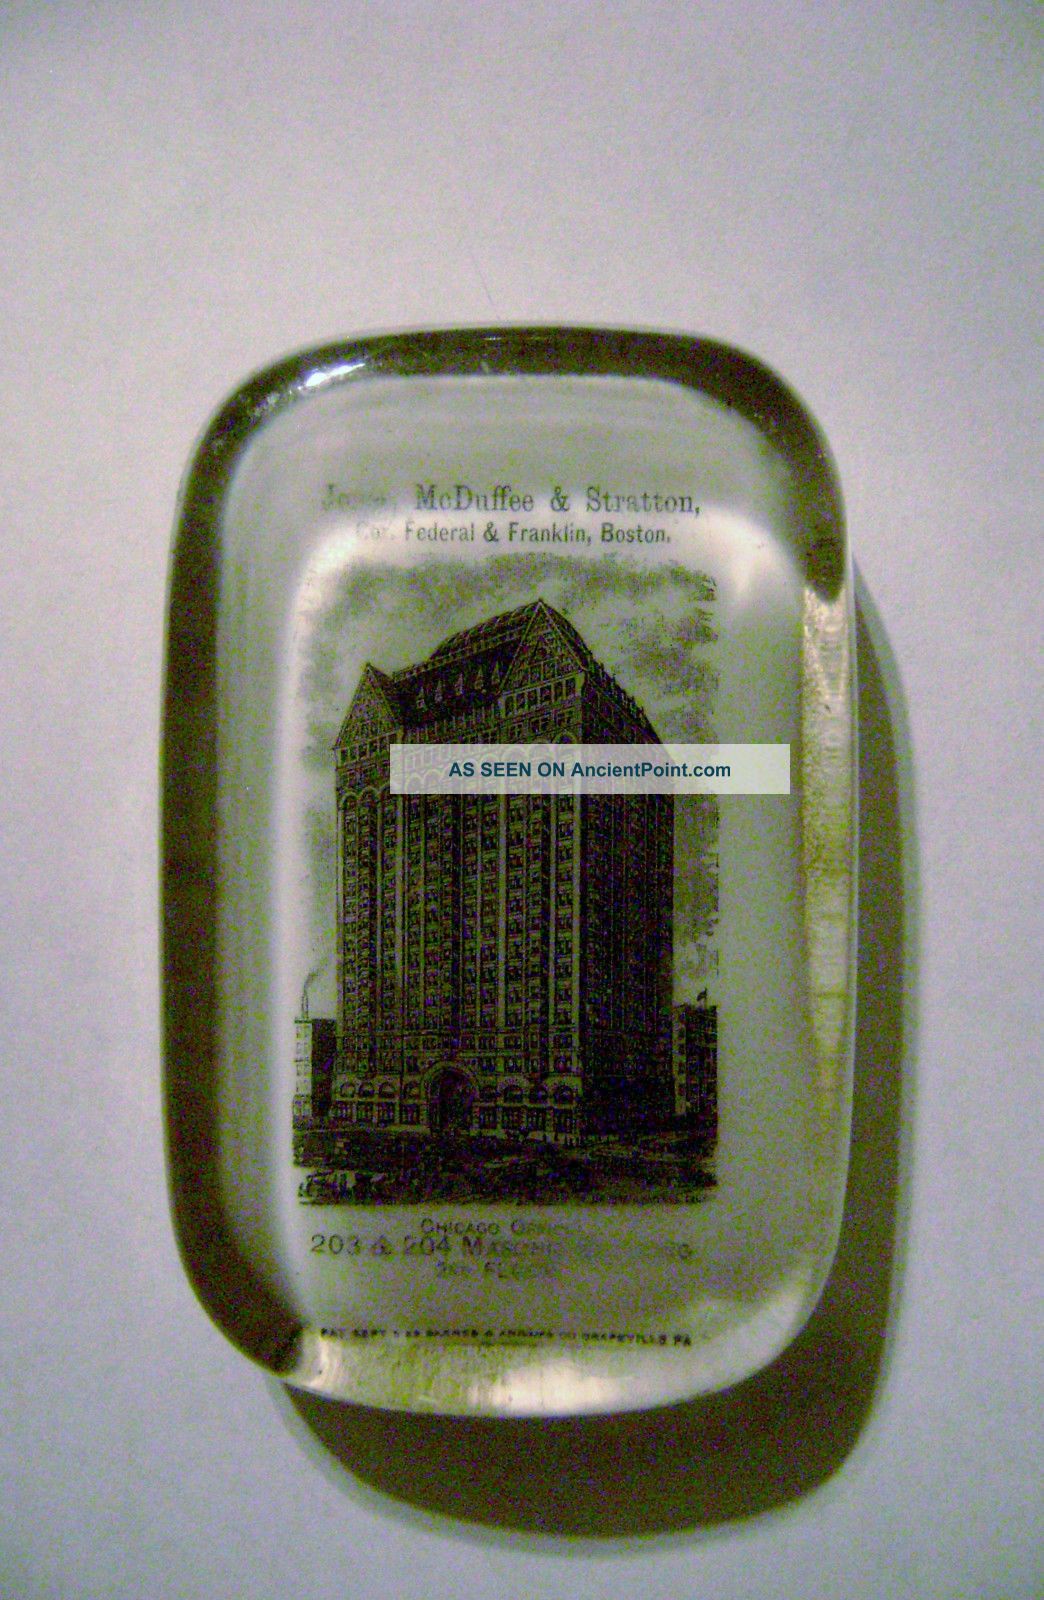 Barnes Abrams Grapeville Advertising Glass Paperweight Chicago Masonic Building Other Mercantile Antiques photo